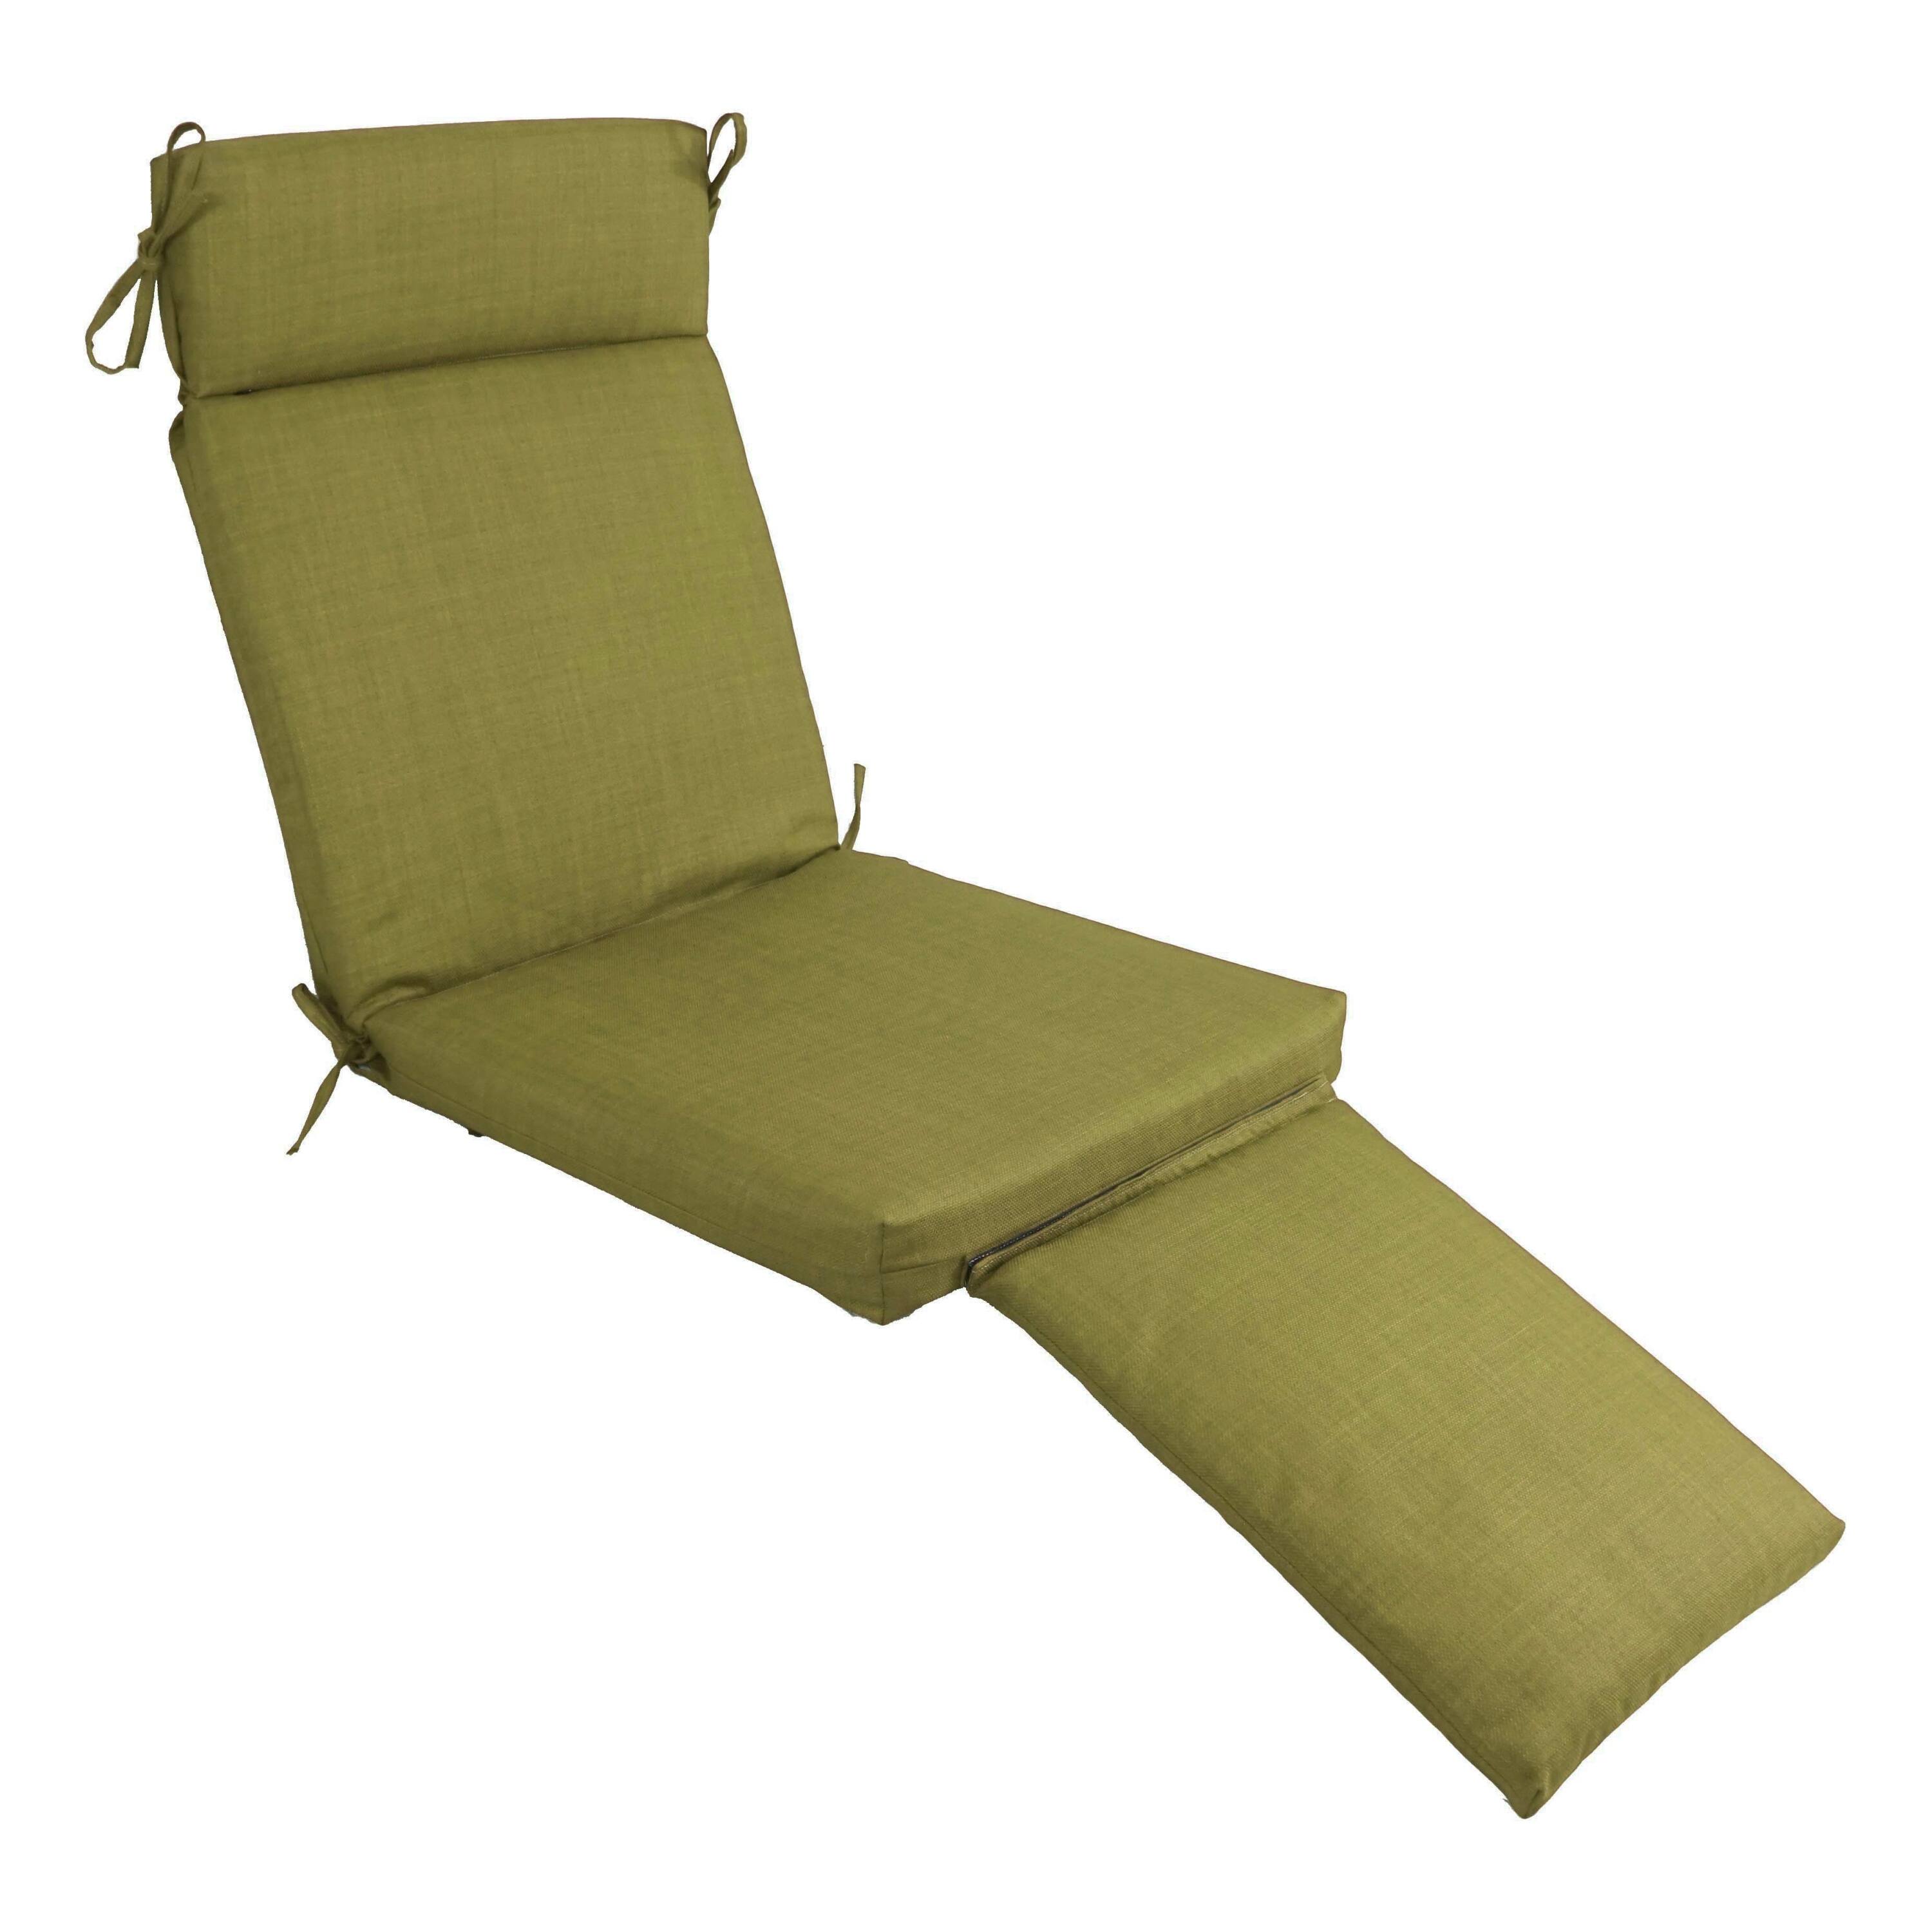 21-inch by 69-inch Outdoor Steamer Deck Lounger Cushion